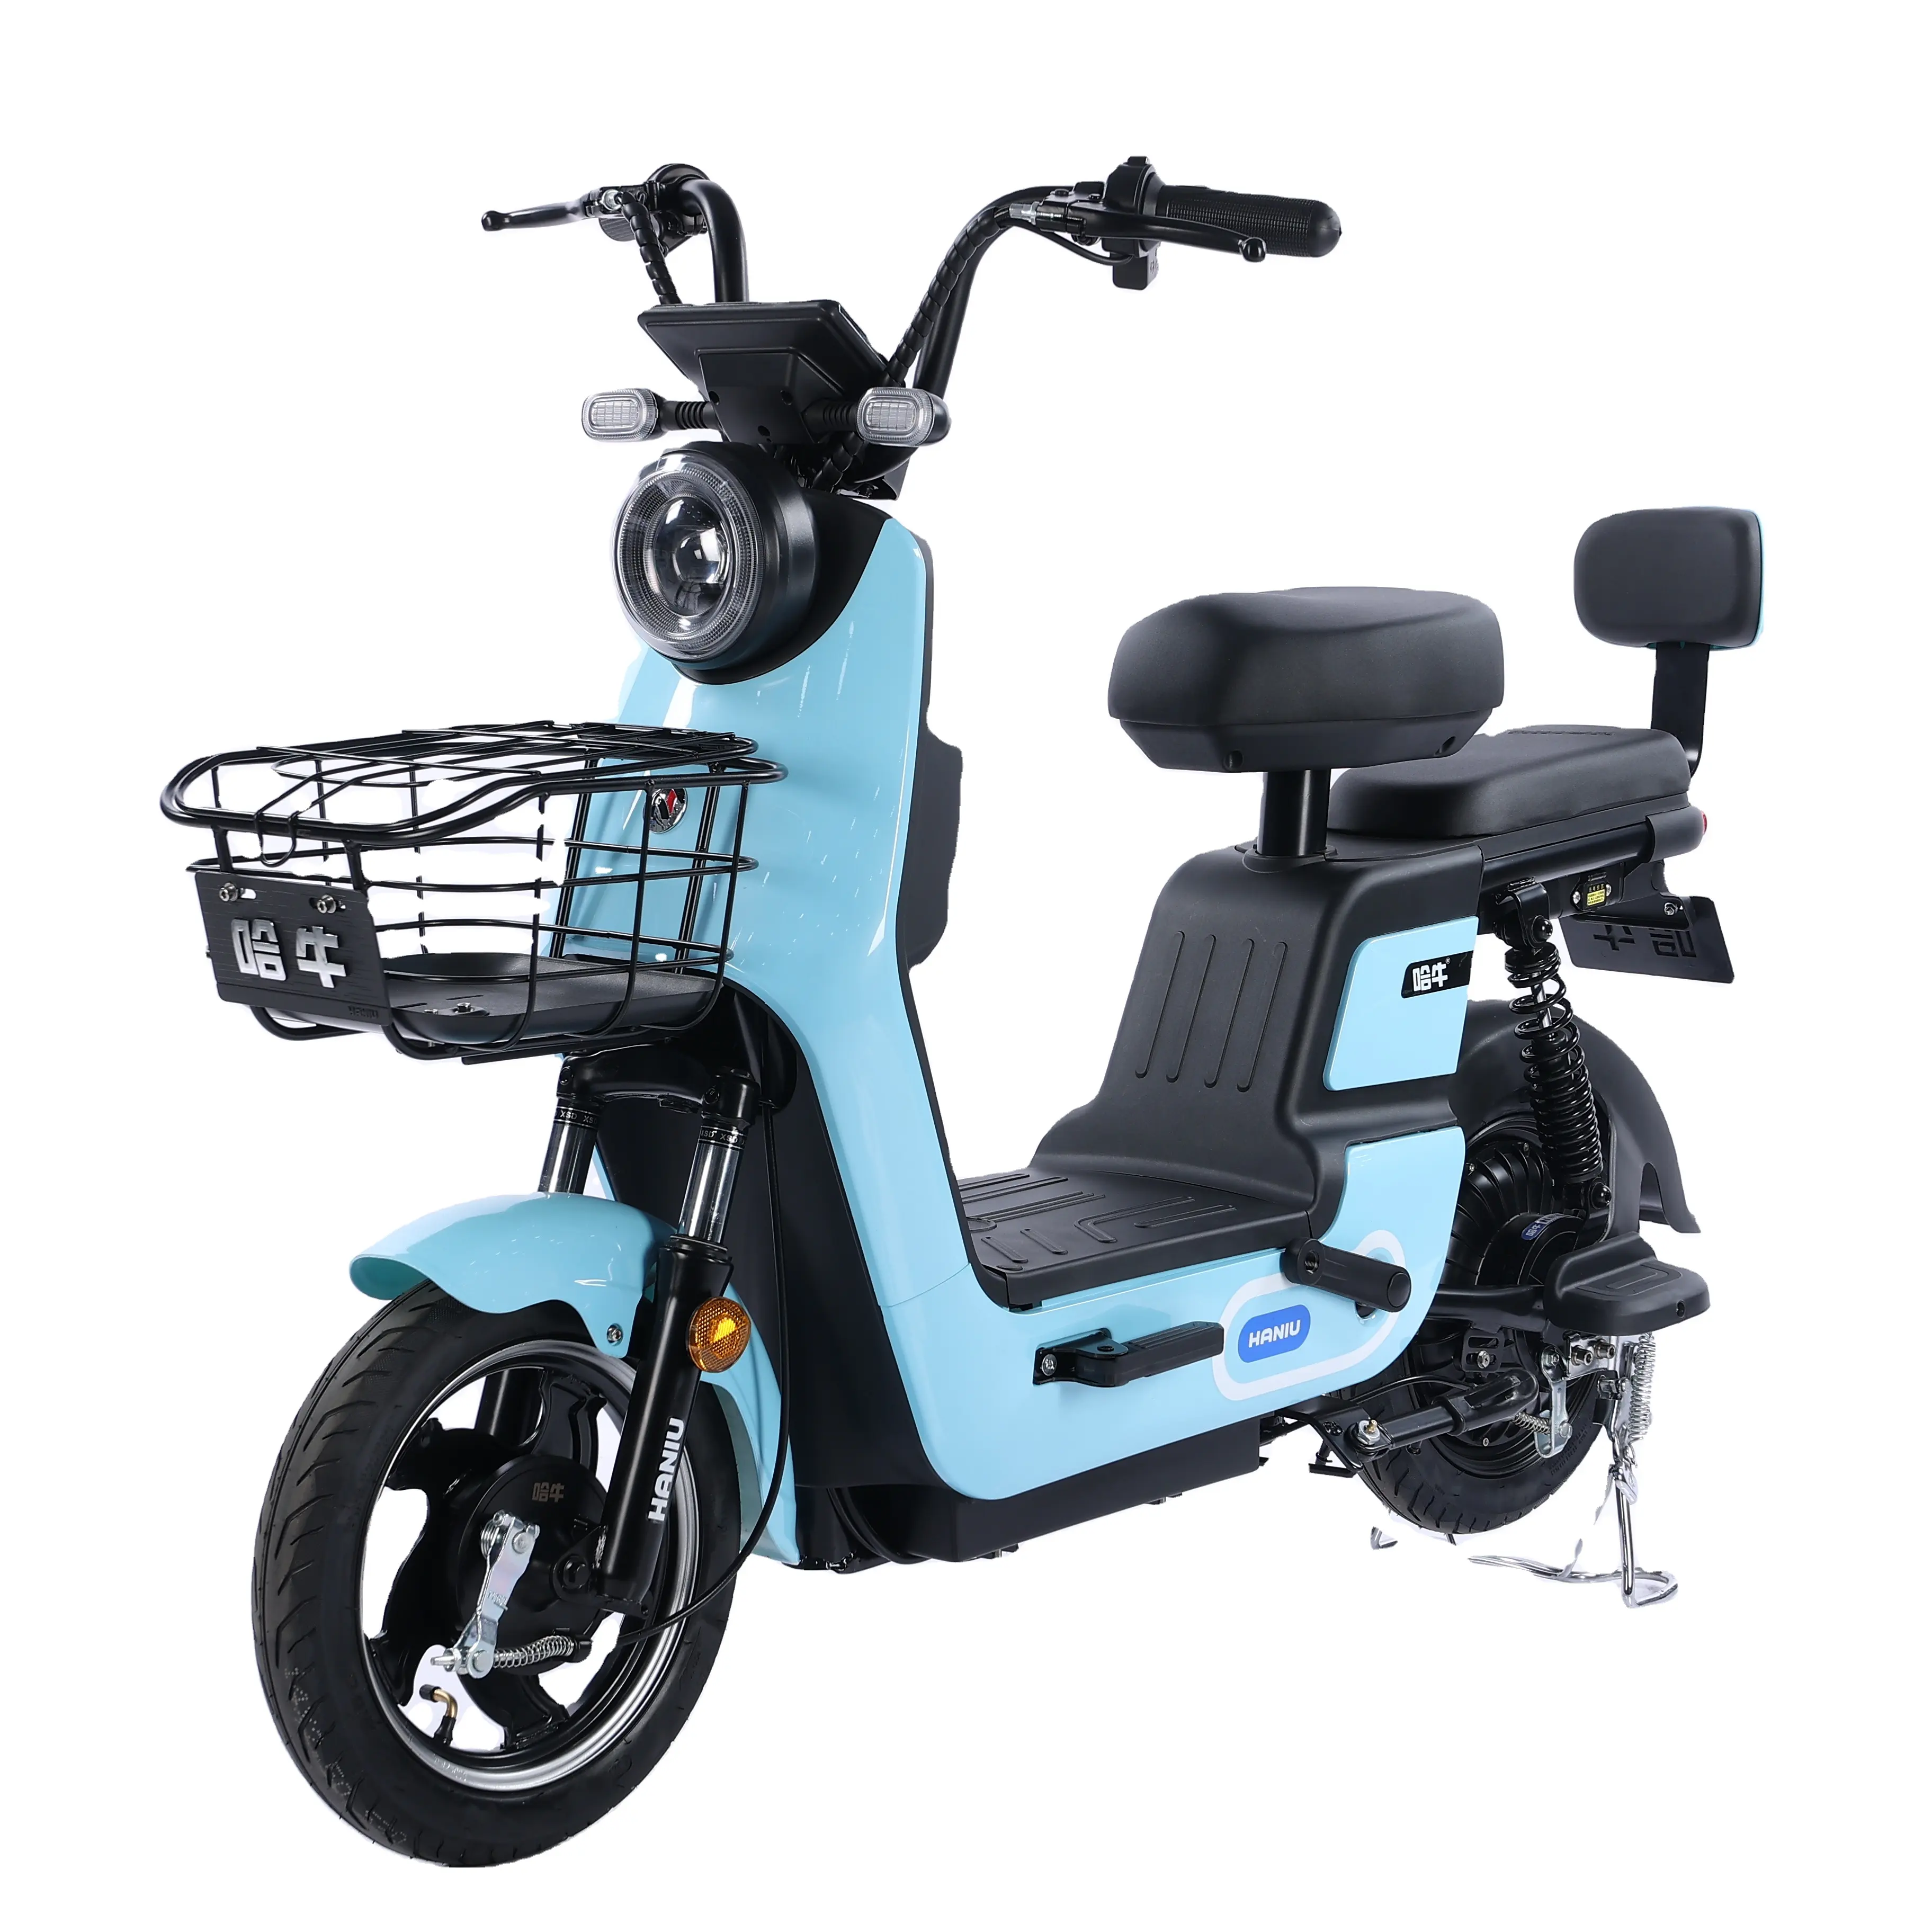 Best popular fashion small electric motorcycle Electrica scooter adult motorcycle electrical moped Electric motorbike